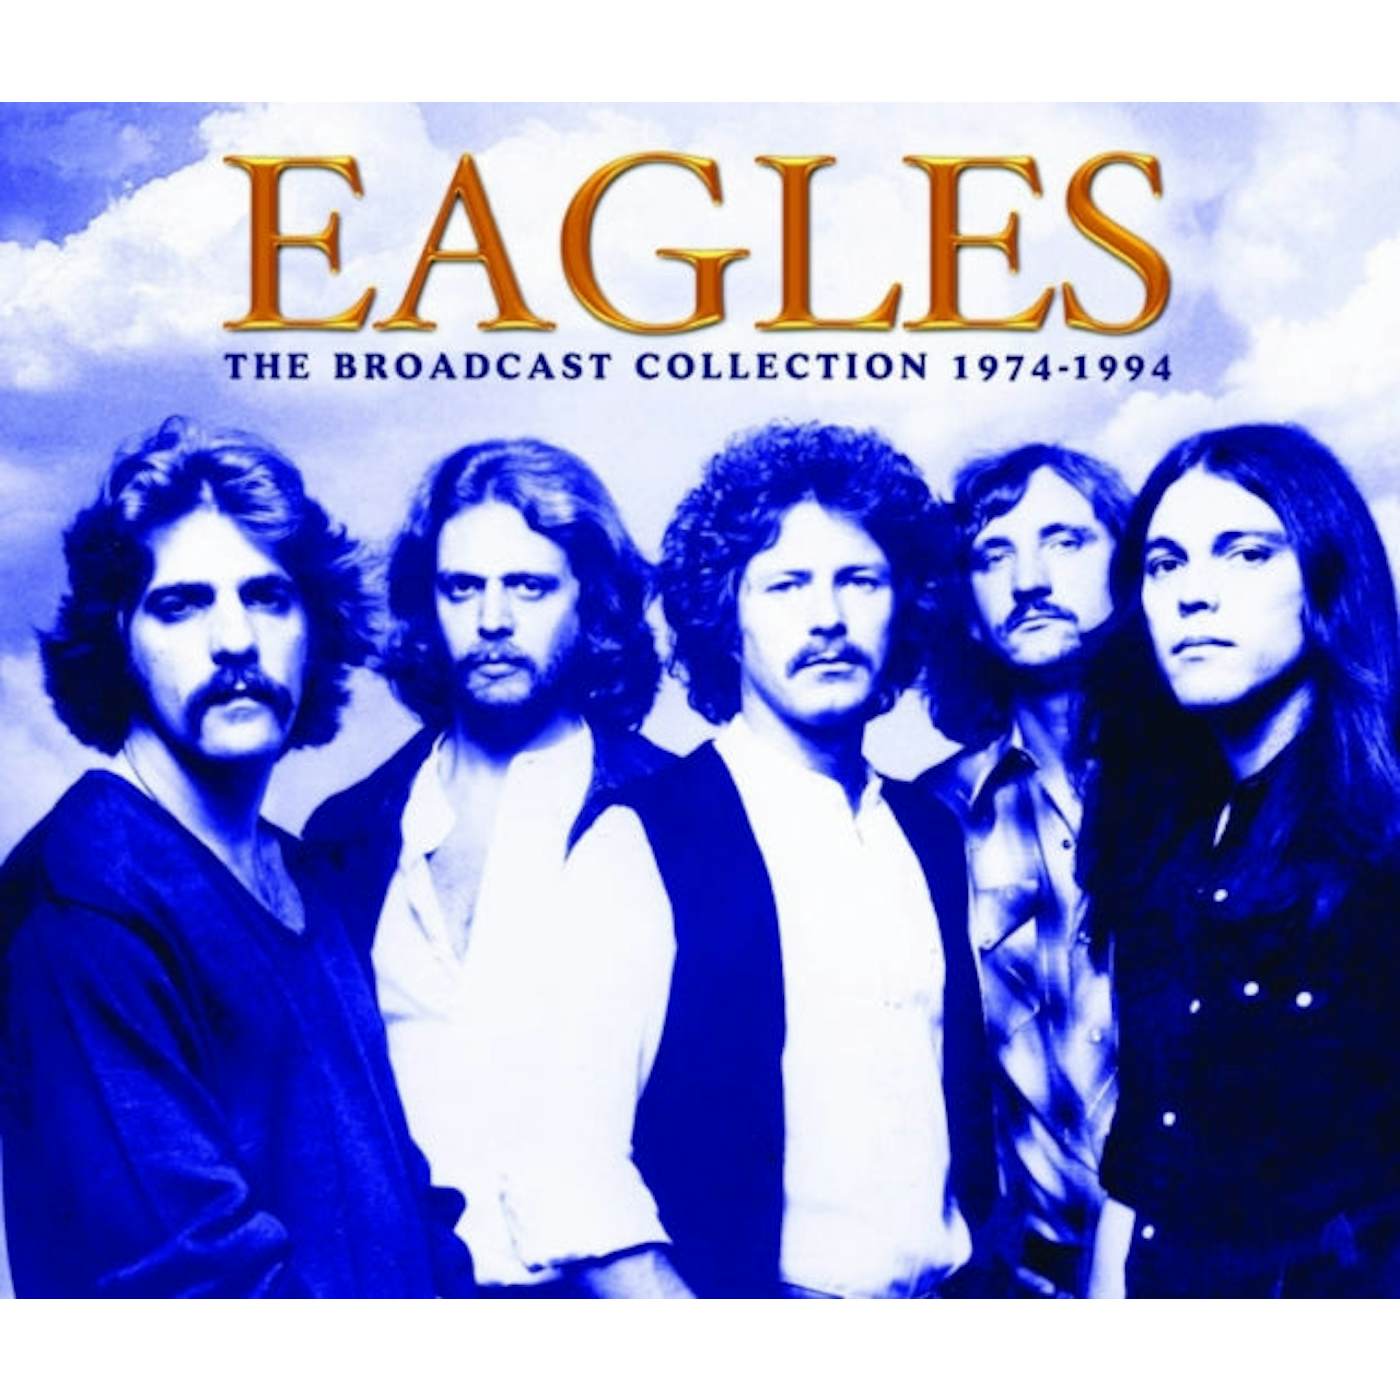 Eagles CD - The Broadcast Collection 19 74-19 94